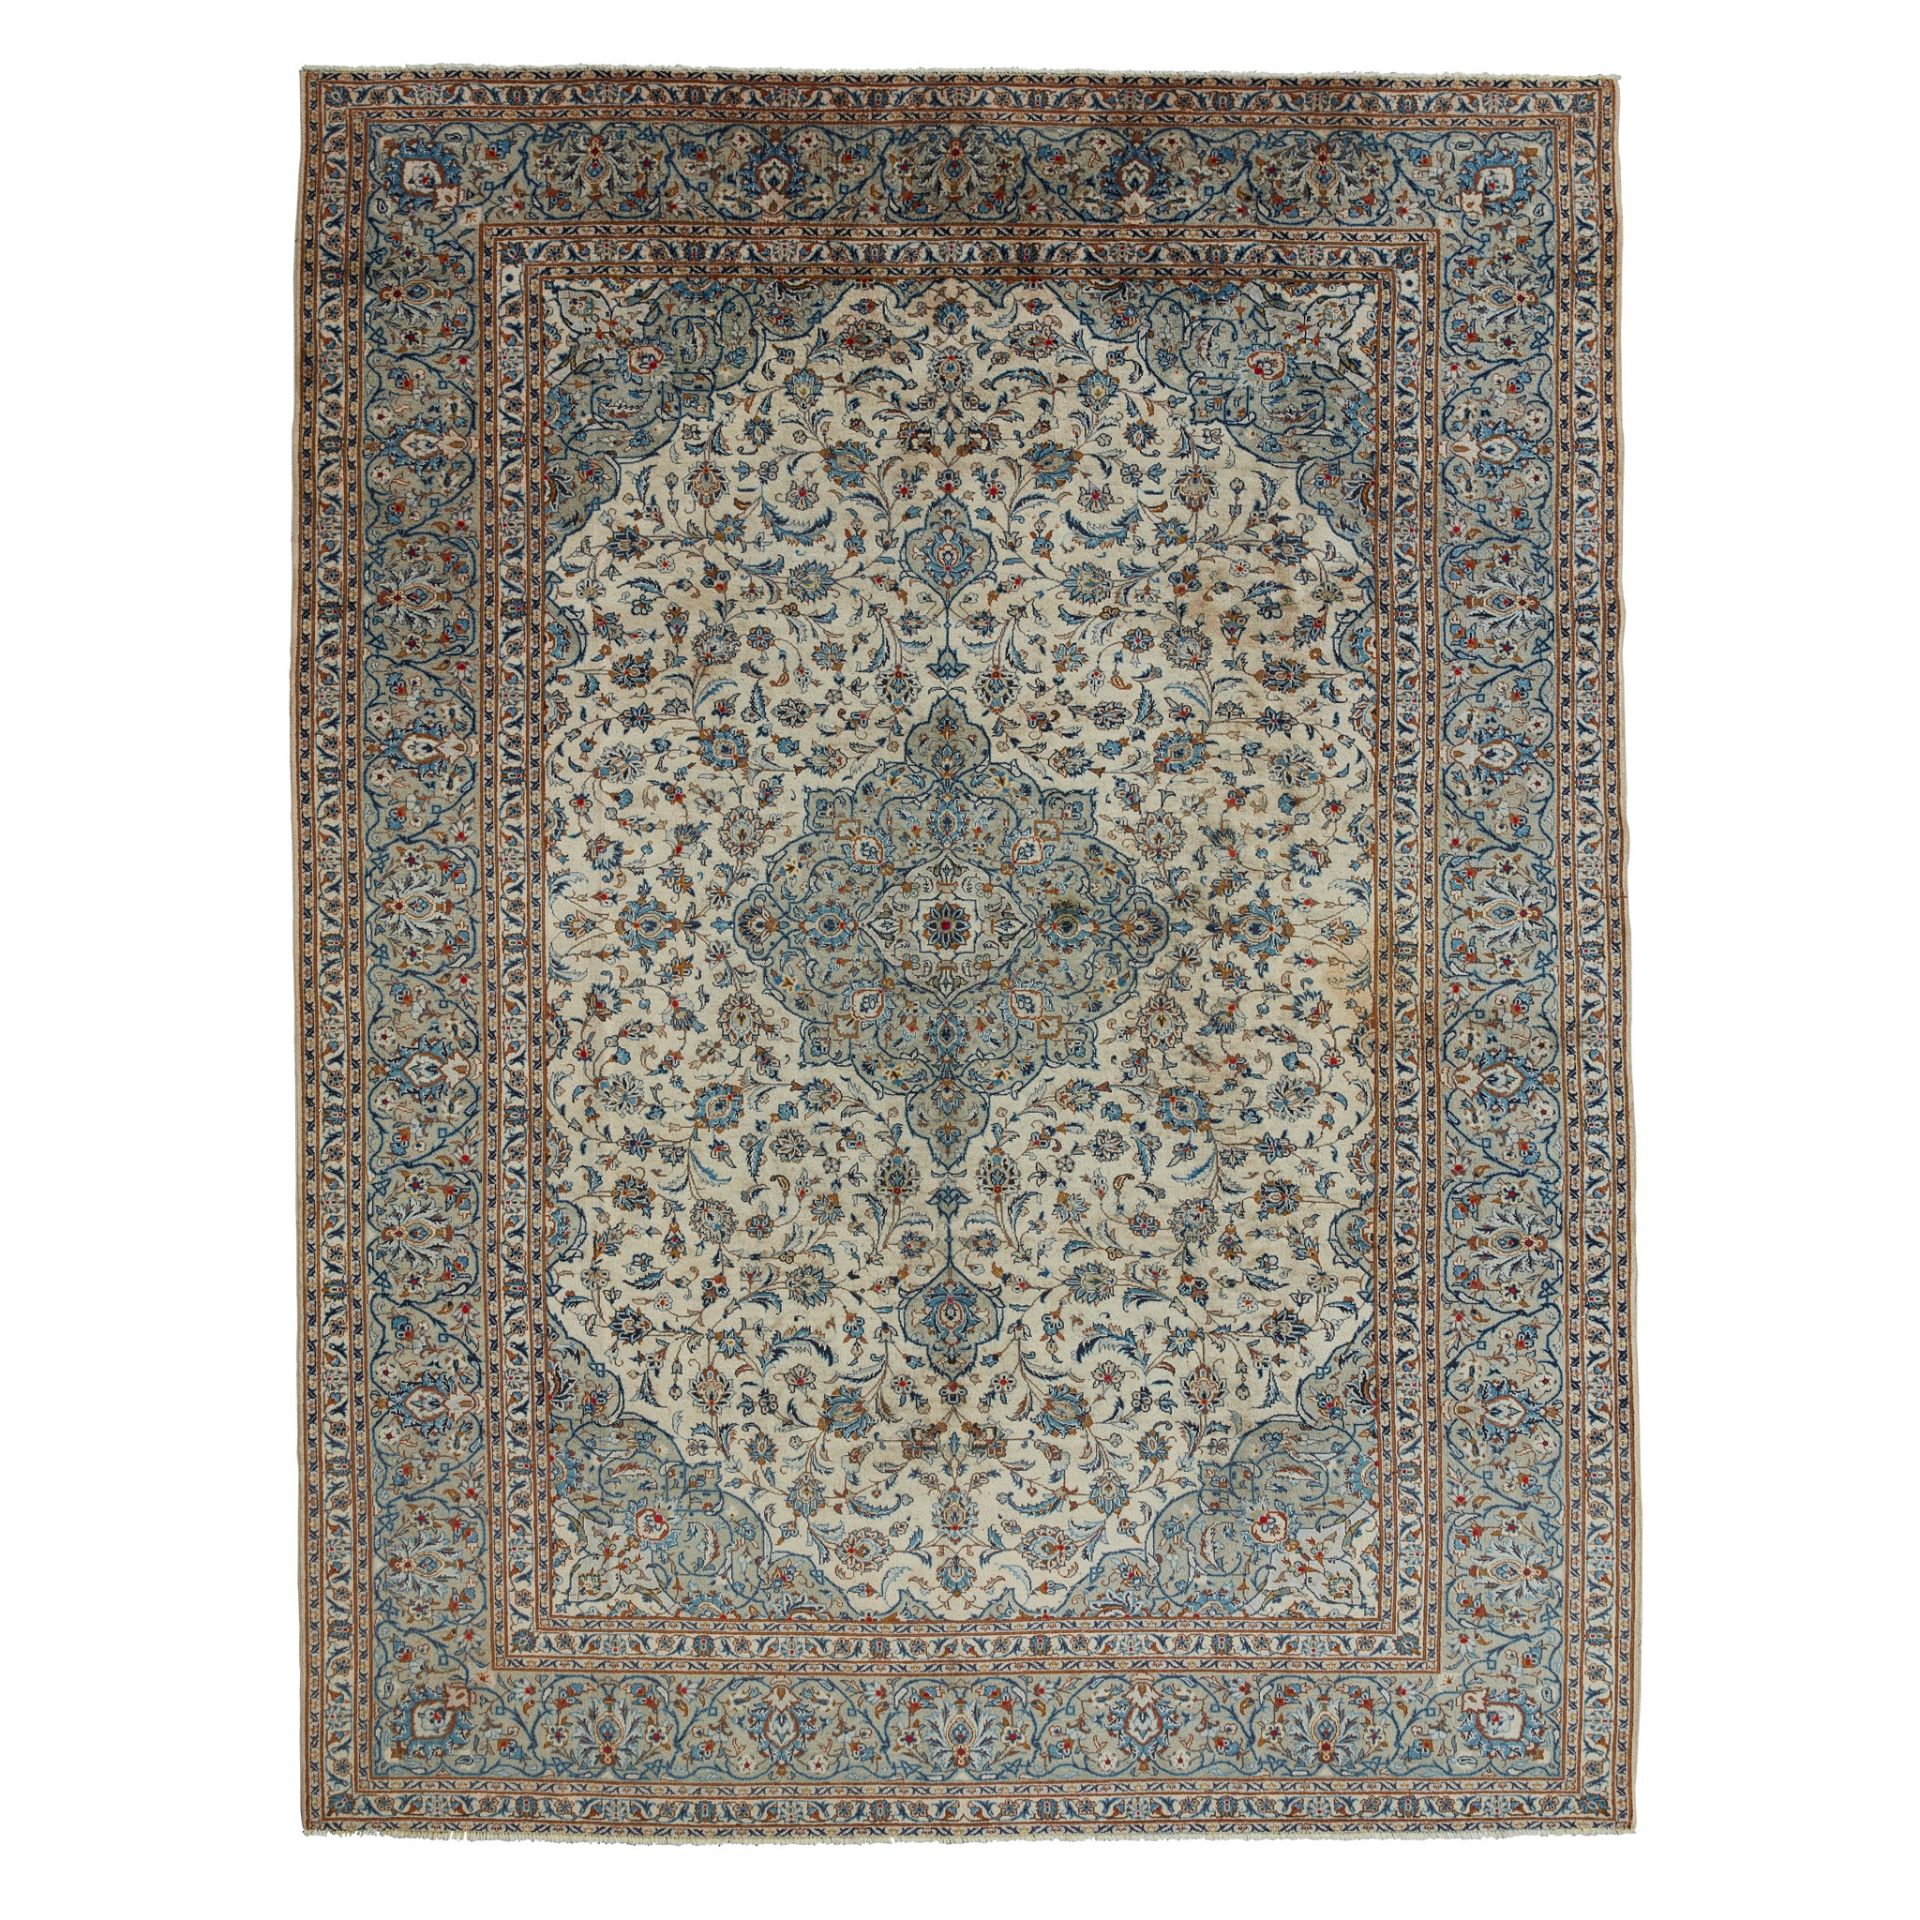 KASHAN CARPET CENTRAL PERSIA, MID 20TH CENTURY